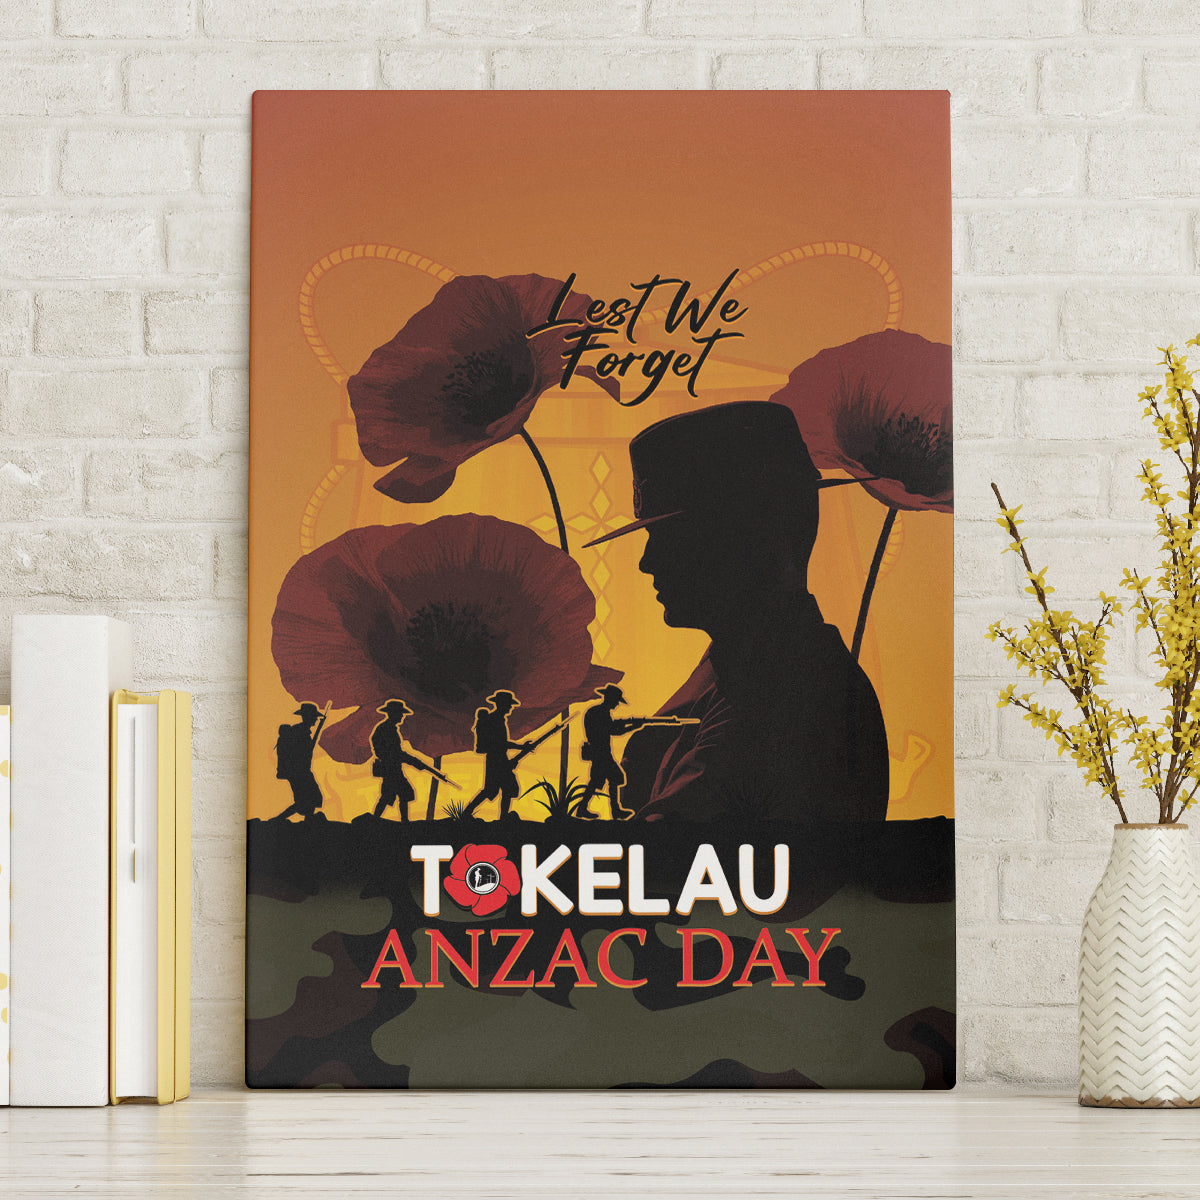 Tokelau ANZAC Day Canvas Wall Art Camouflage With Poppies Lest We Forget LT14 Yellow - Polynesian Pride